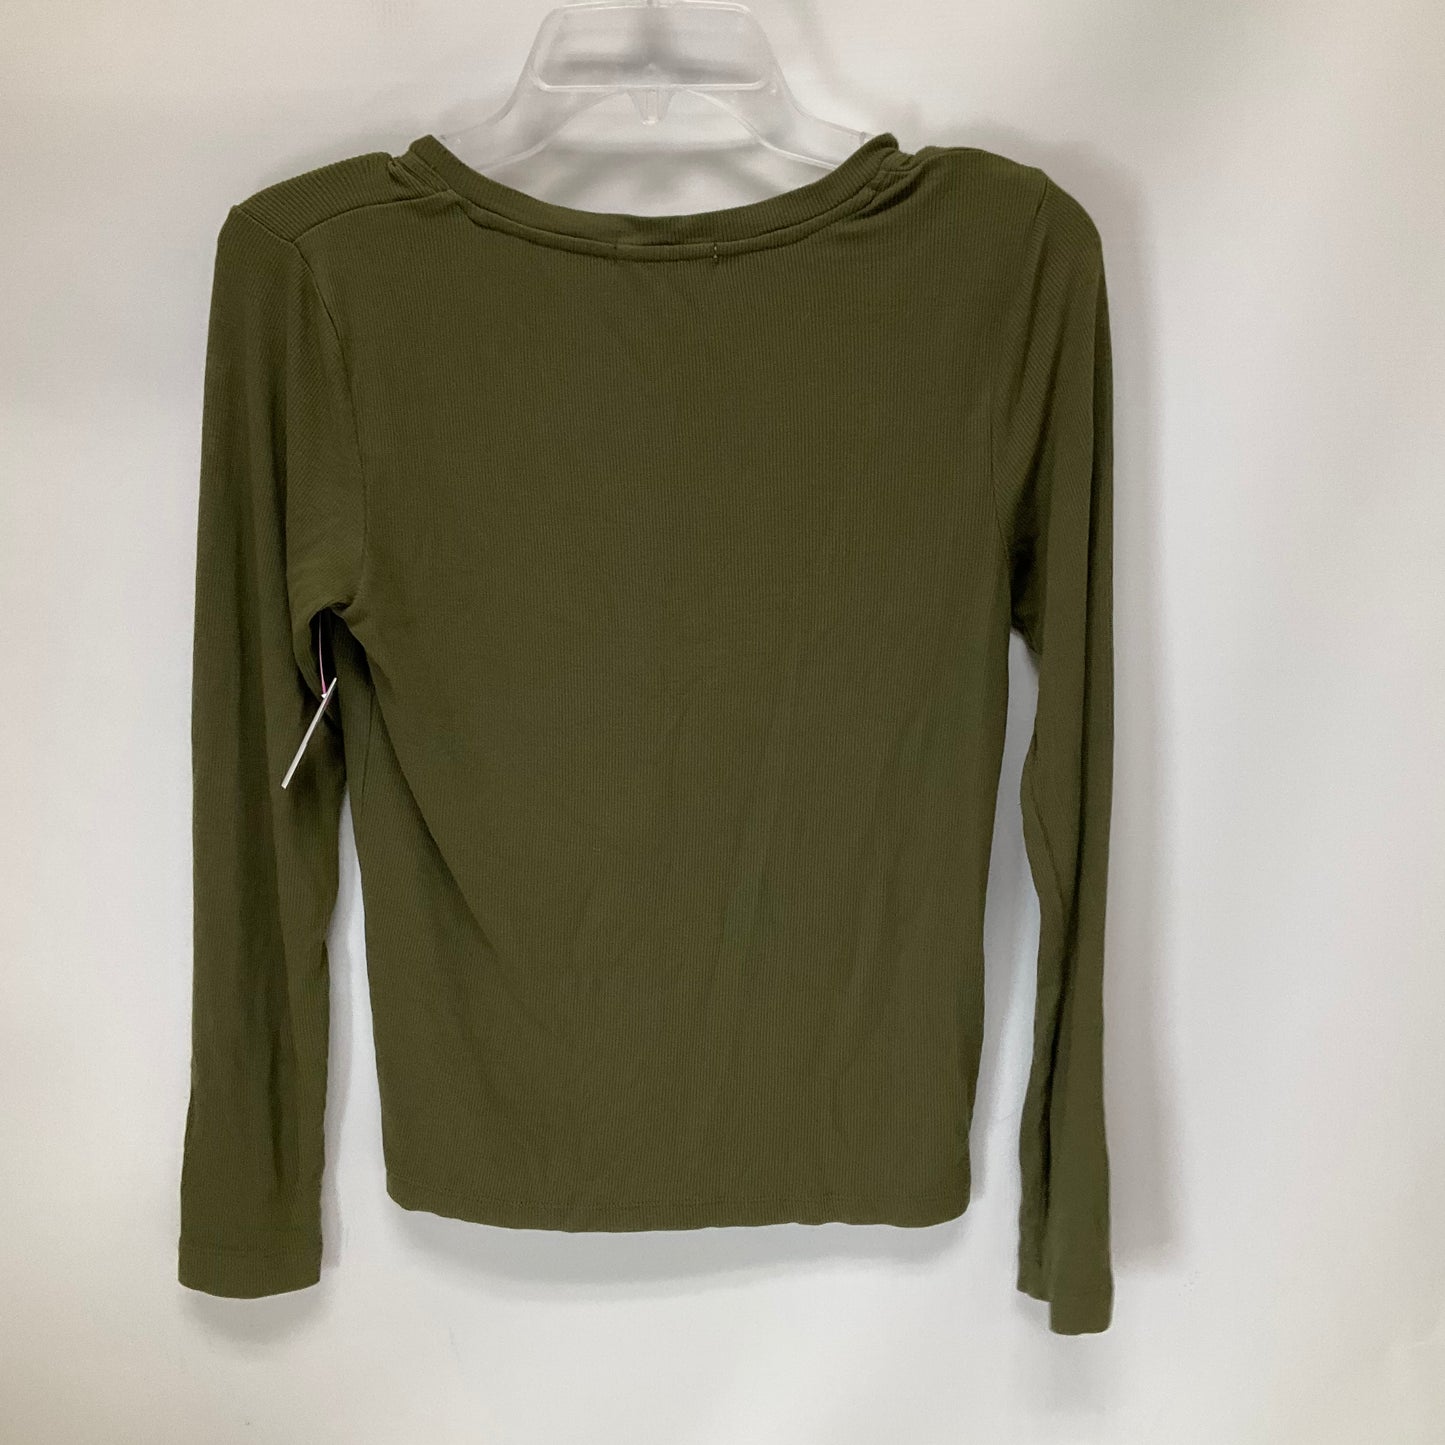 Top Long Sleeve By Marine Layer  Size: M